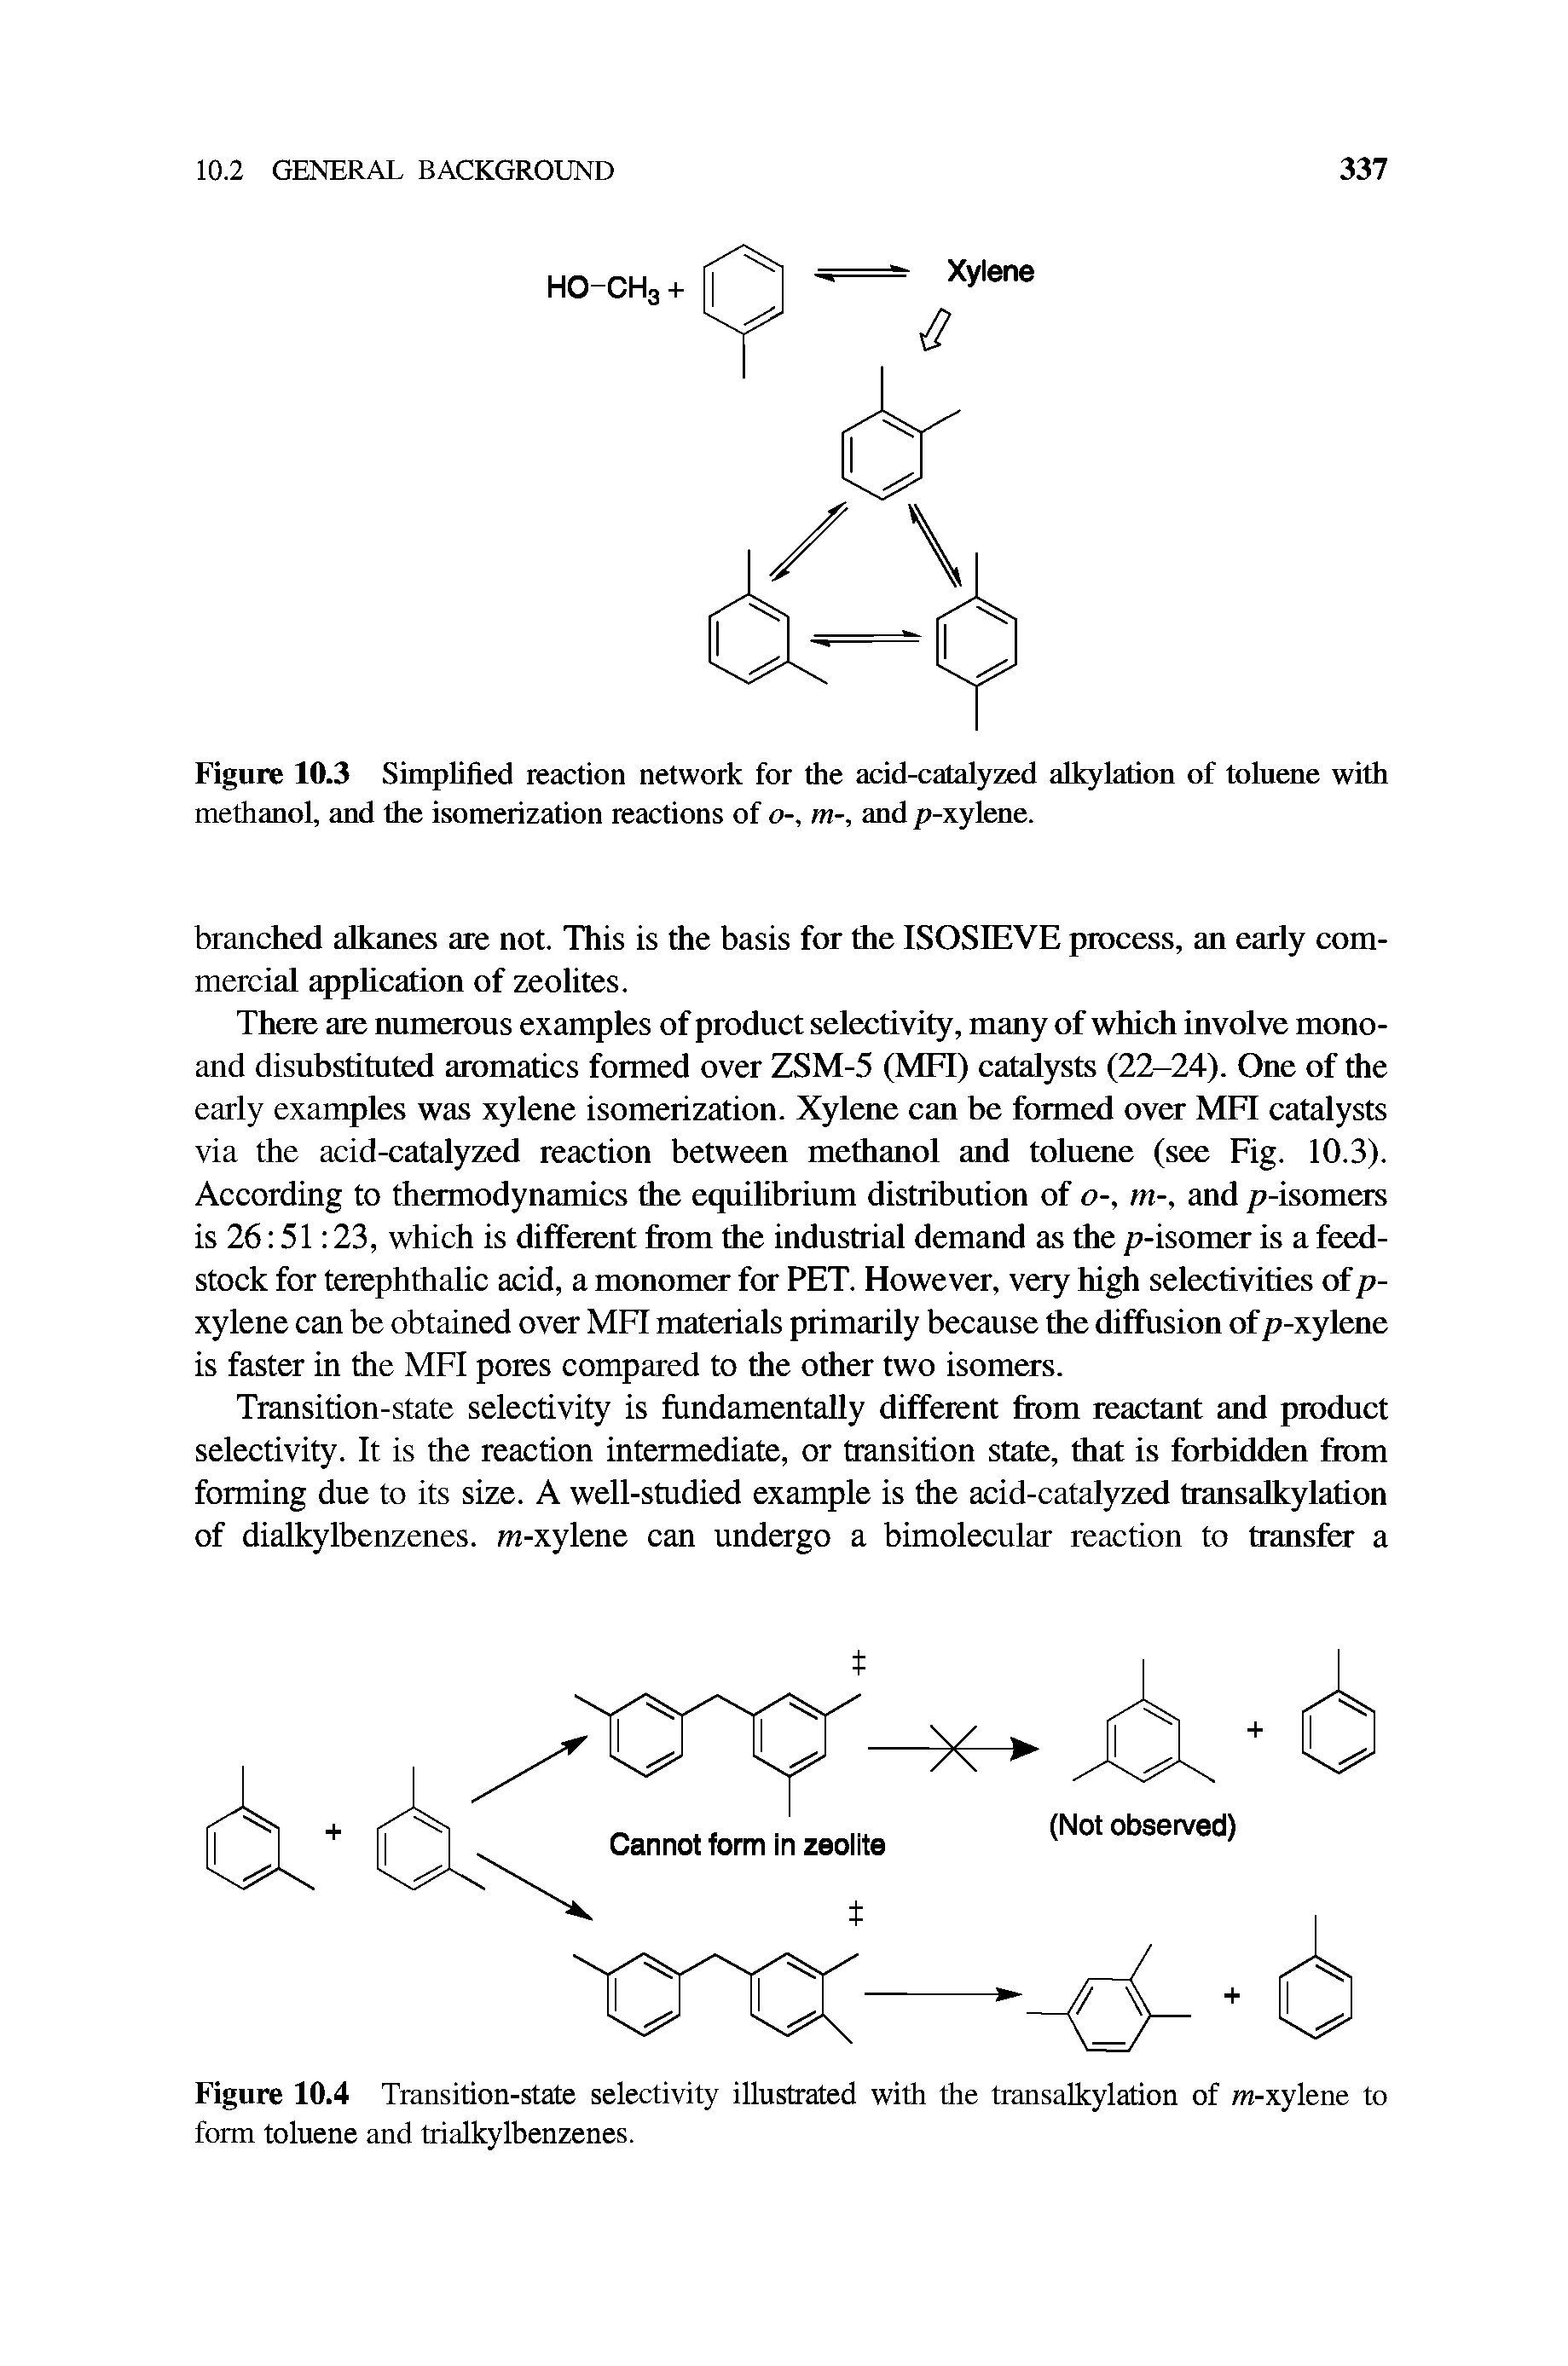 Figure 10.3 Simplified reaction network for the acid-catalyzed alkylation of toluene with methanol, and the isomerization reactions of o-, m-, and p-xylene.